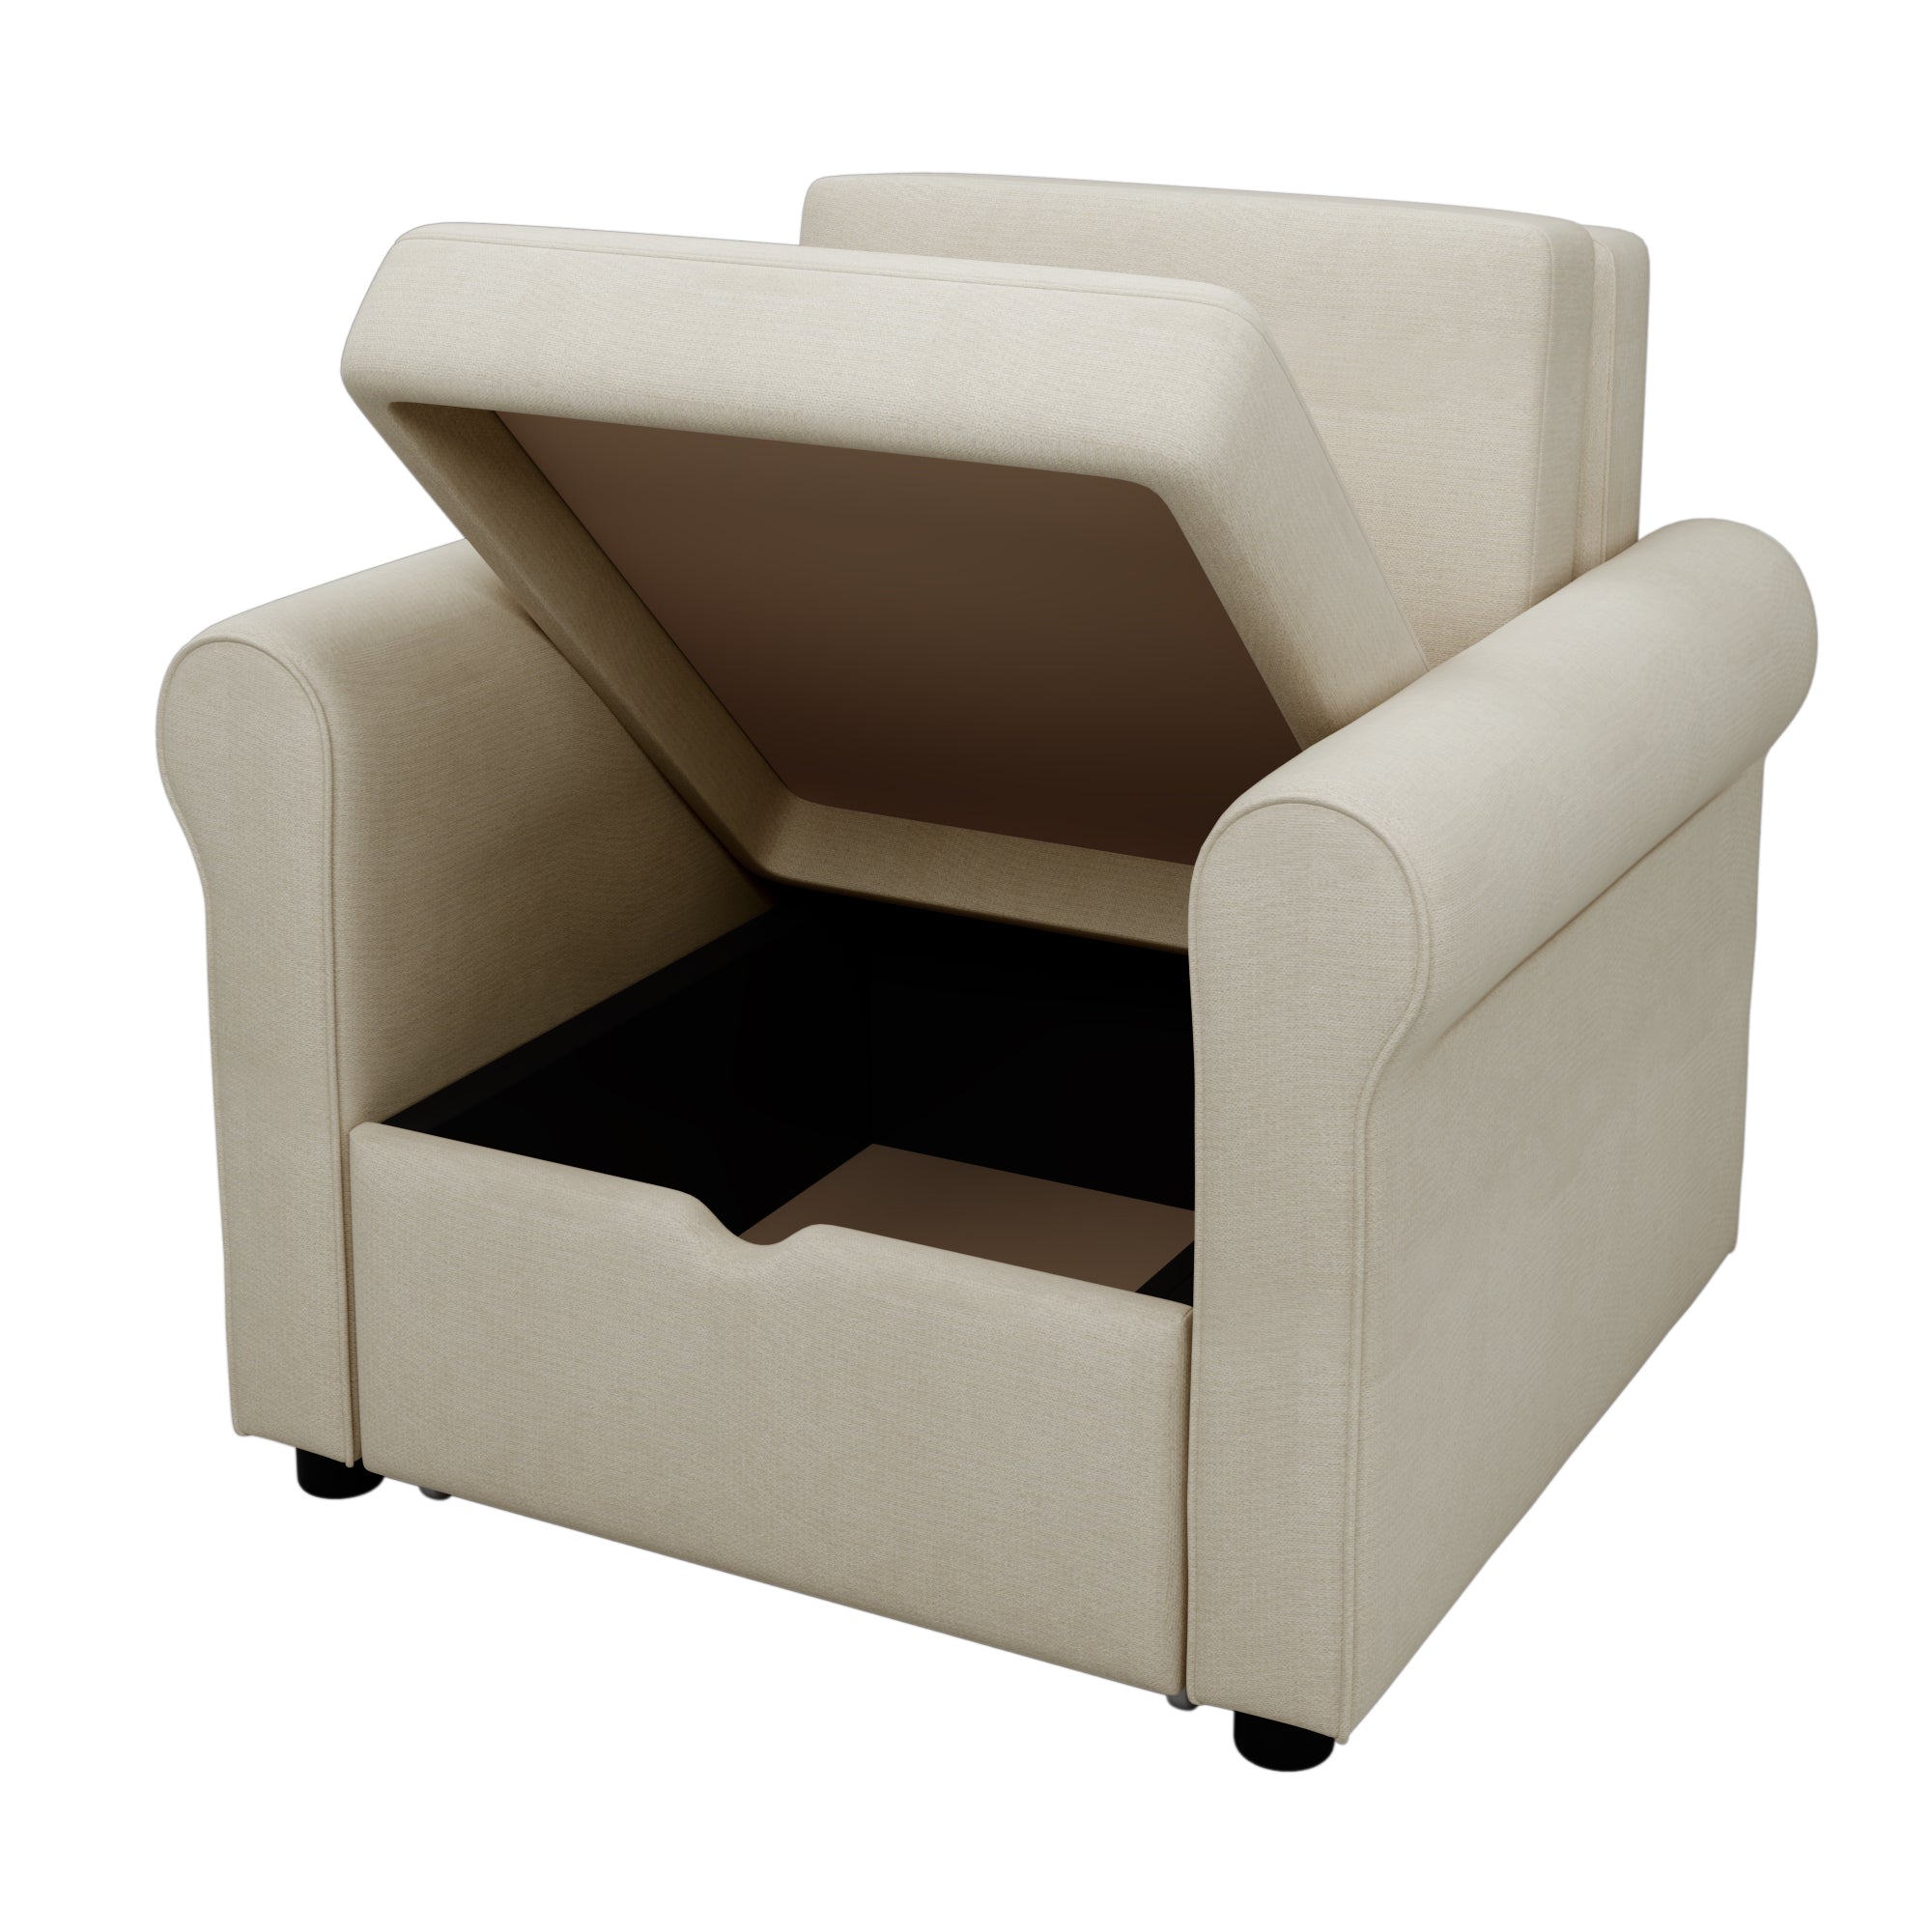 2 in 1 Sofa Bed Chair (Beige)